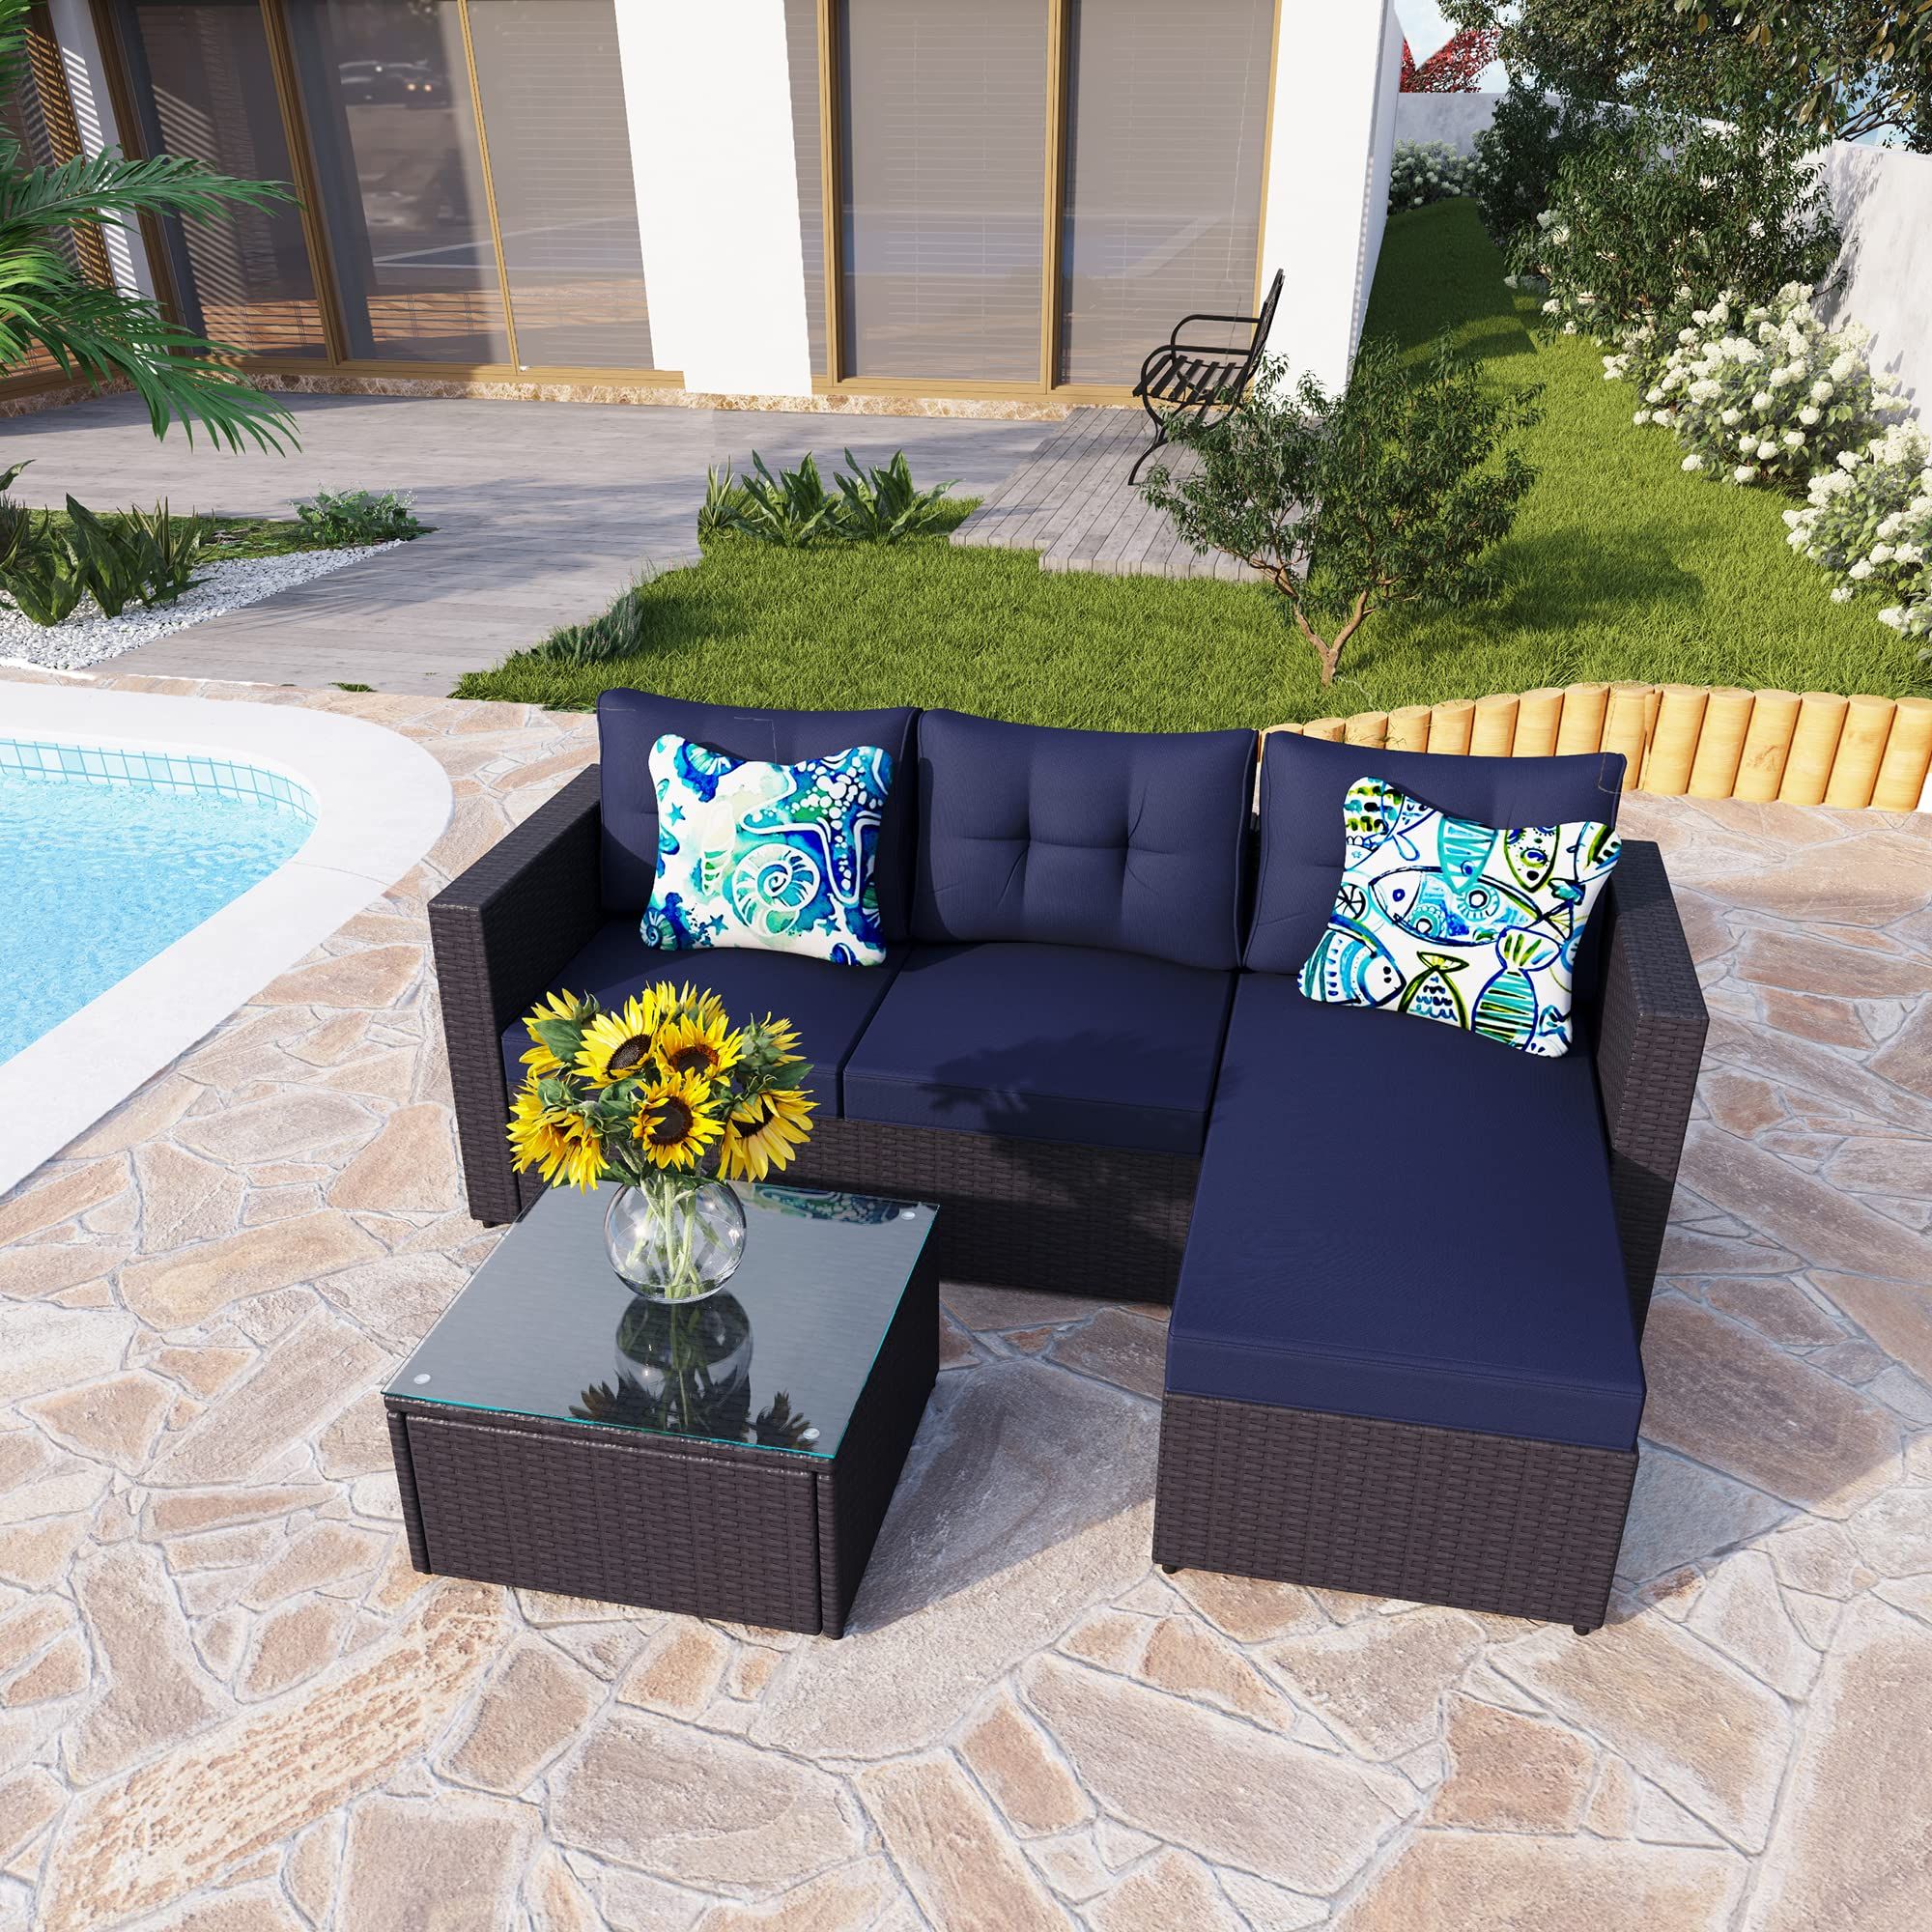 Outdoor Rattan Sectional Sofas With Coffee Table For Most Up To Date Amazon: Phi Villa 77" Wide Outdoor Rattan Sectional Sofa With Cushions  – Small Patio Wicker Furniture Set (3 – Person Seating Group, Blue) : Patio,  Lawn & Garden (View 4 of 15)